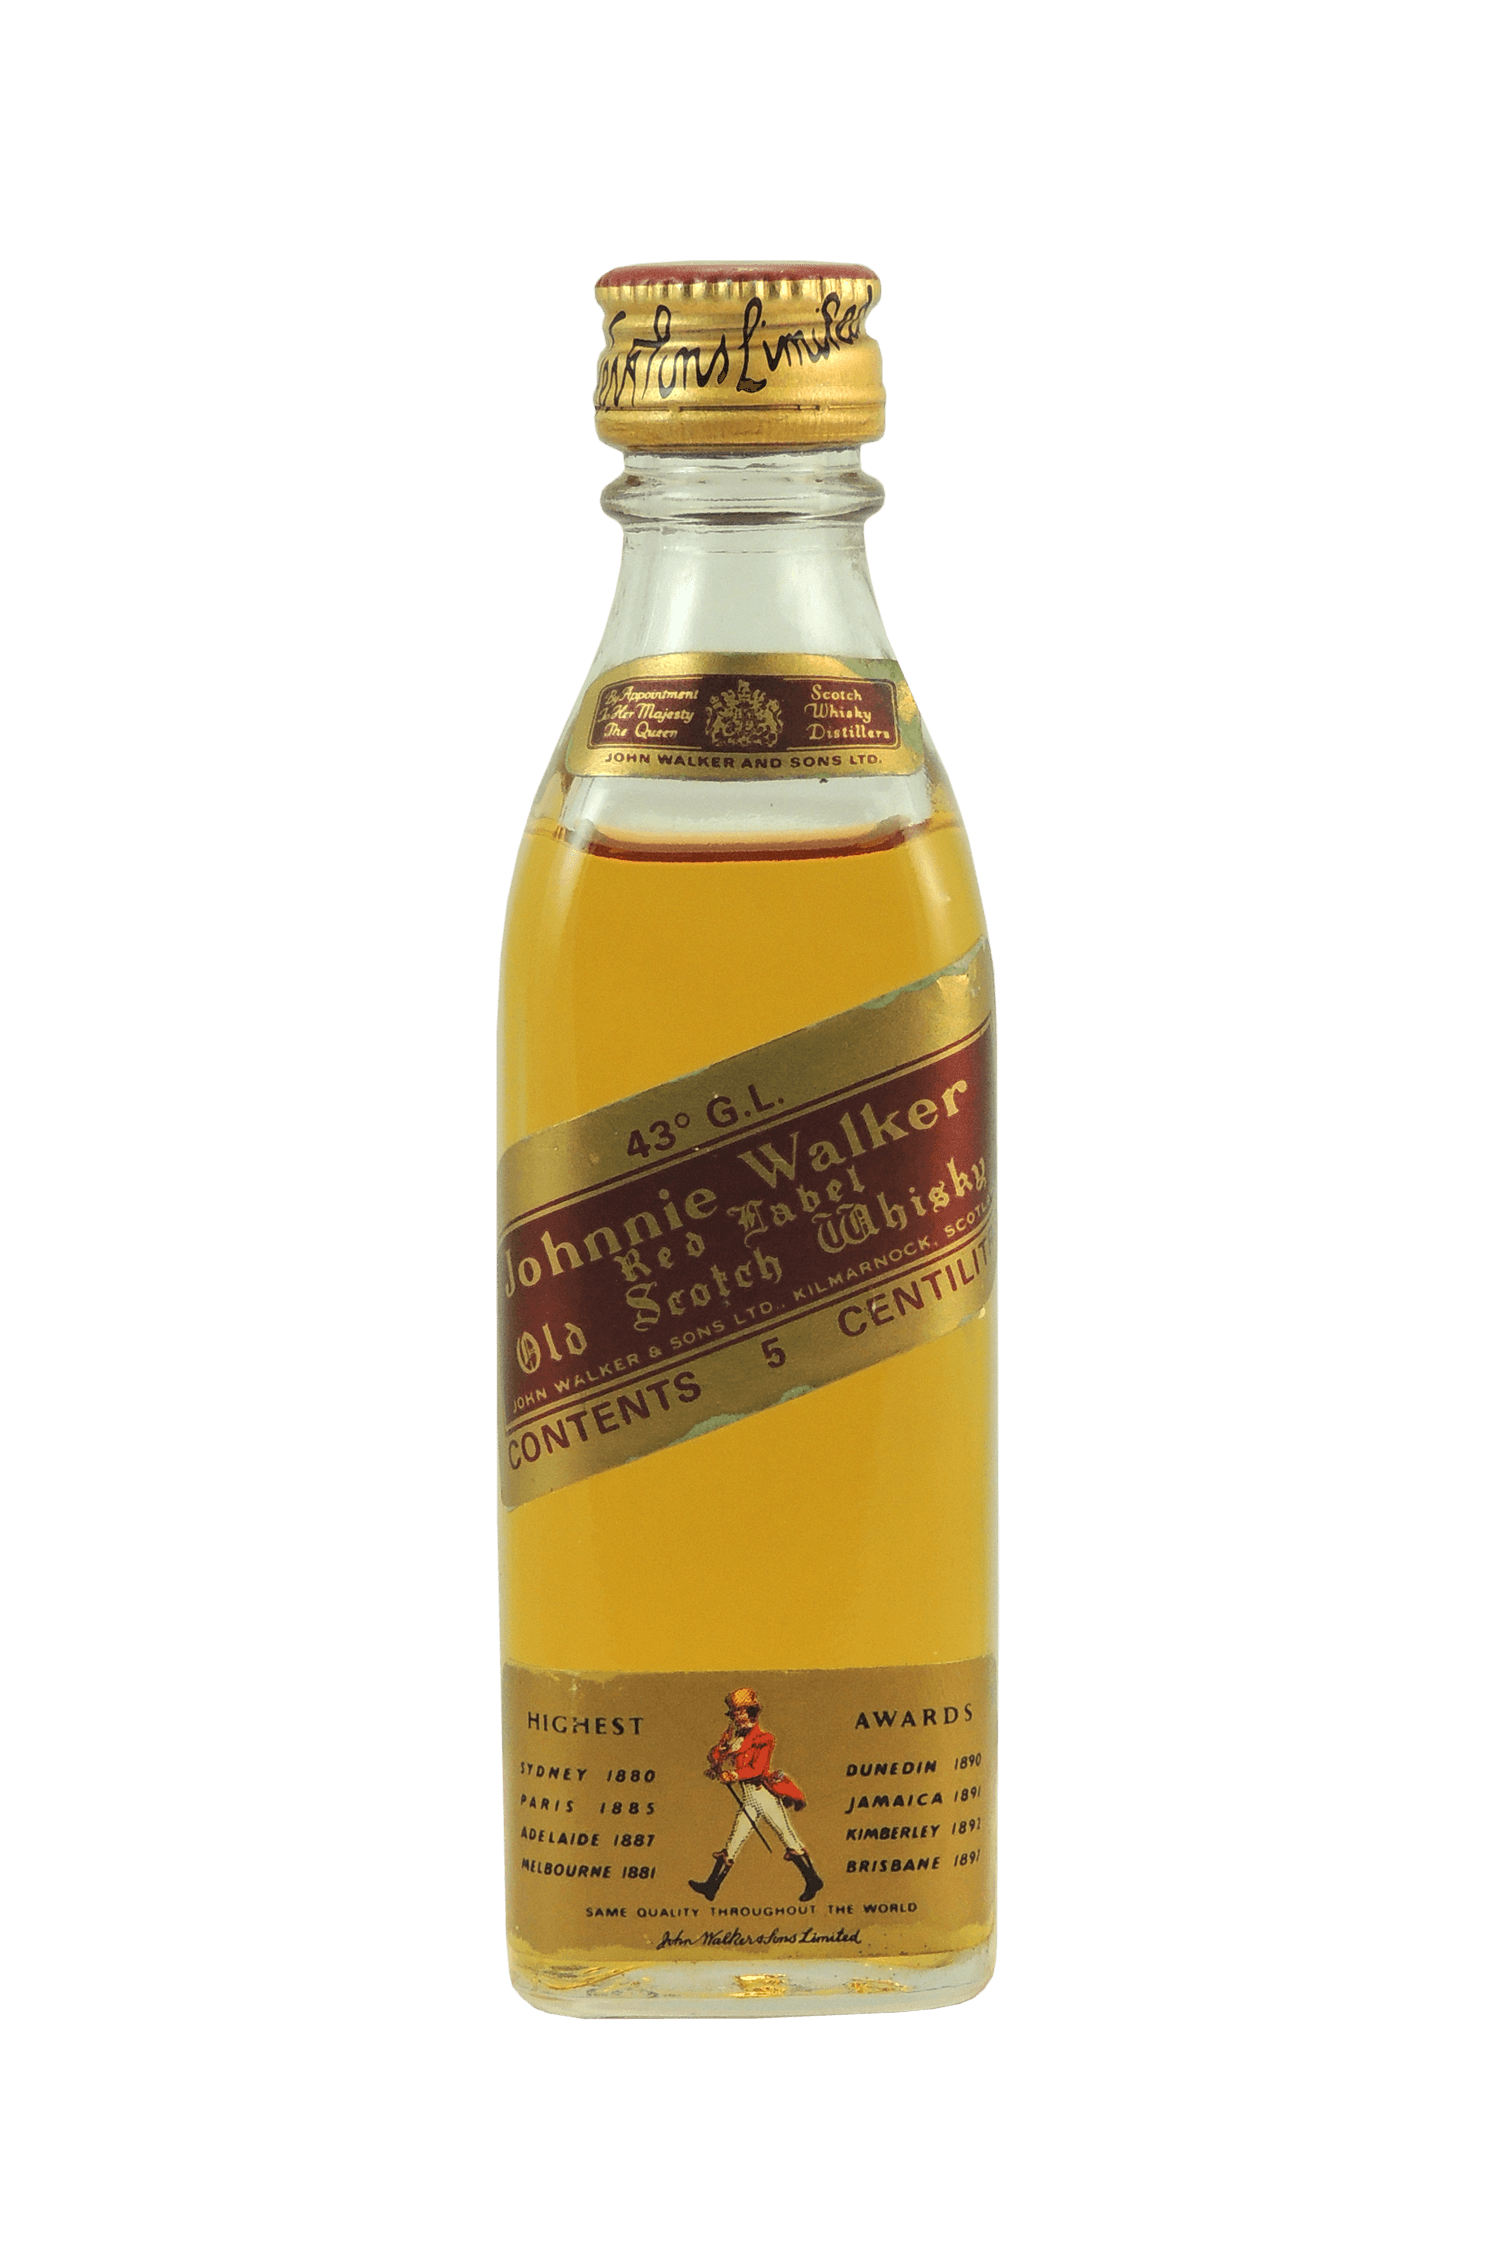 Red Label Old Scotch Whisky